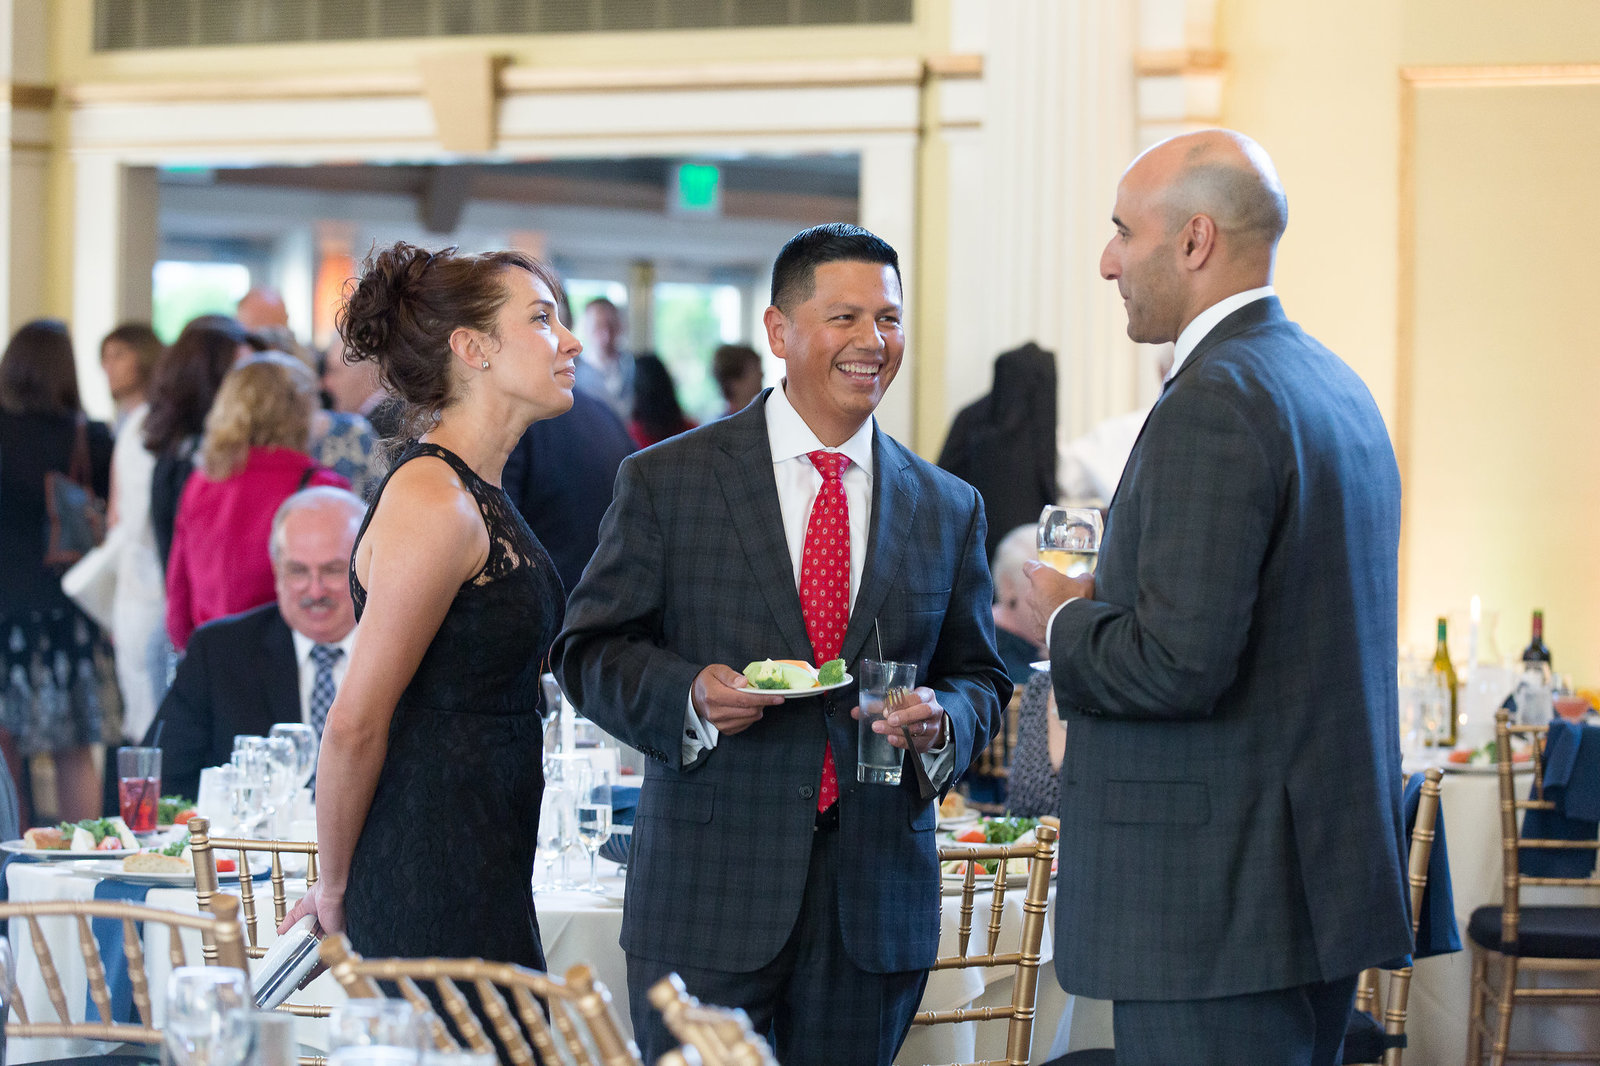 Nick-Cinea-Commercial-Corporate-Event-Photography58